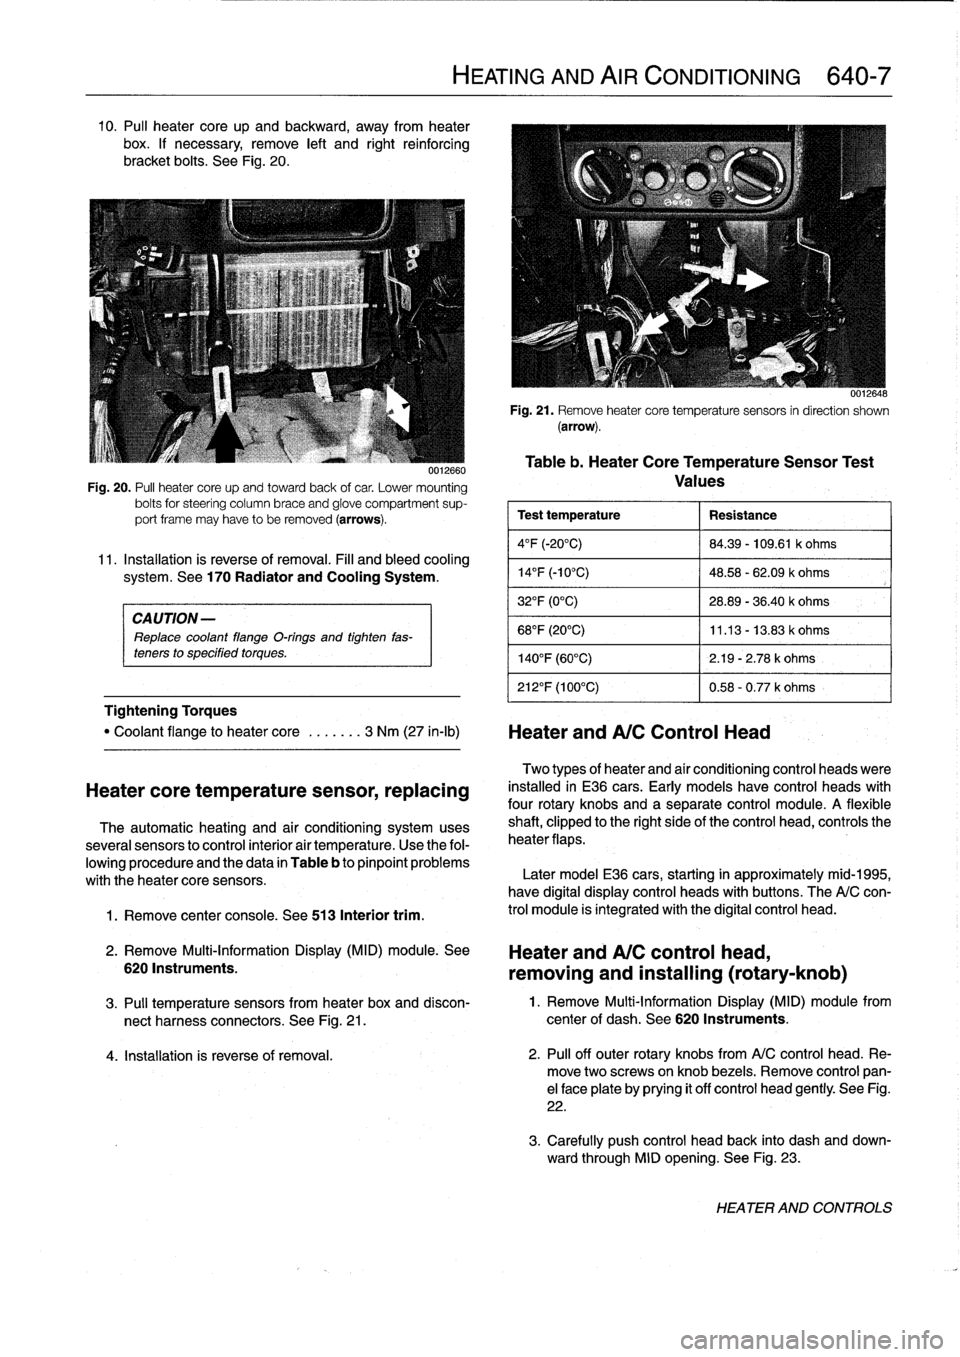 BMW 318i 1997 E36 Owners Manual 10
.
Pul¡
heater
core
up
and
backward,
away
from
heater
box
.
If
necessary,
remove
left
and
right
reinforcing
bracket
bolts
.
See
Fig
.
20
.

CAUTION-

Replace
coolant
flange
O-rings
and
tighten
fas-